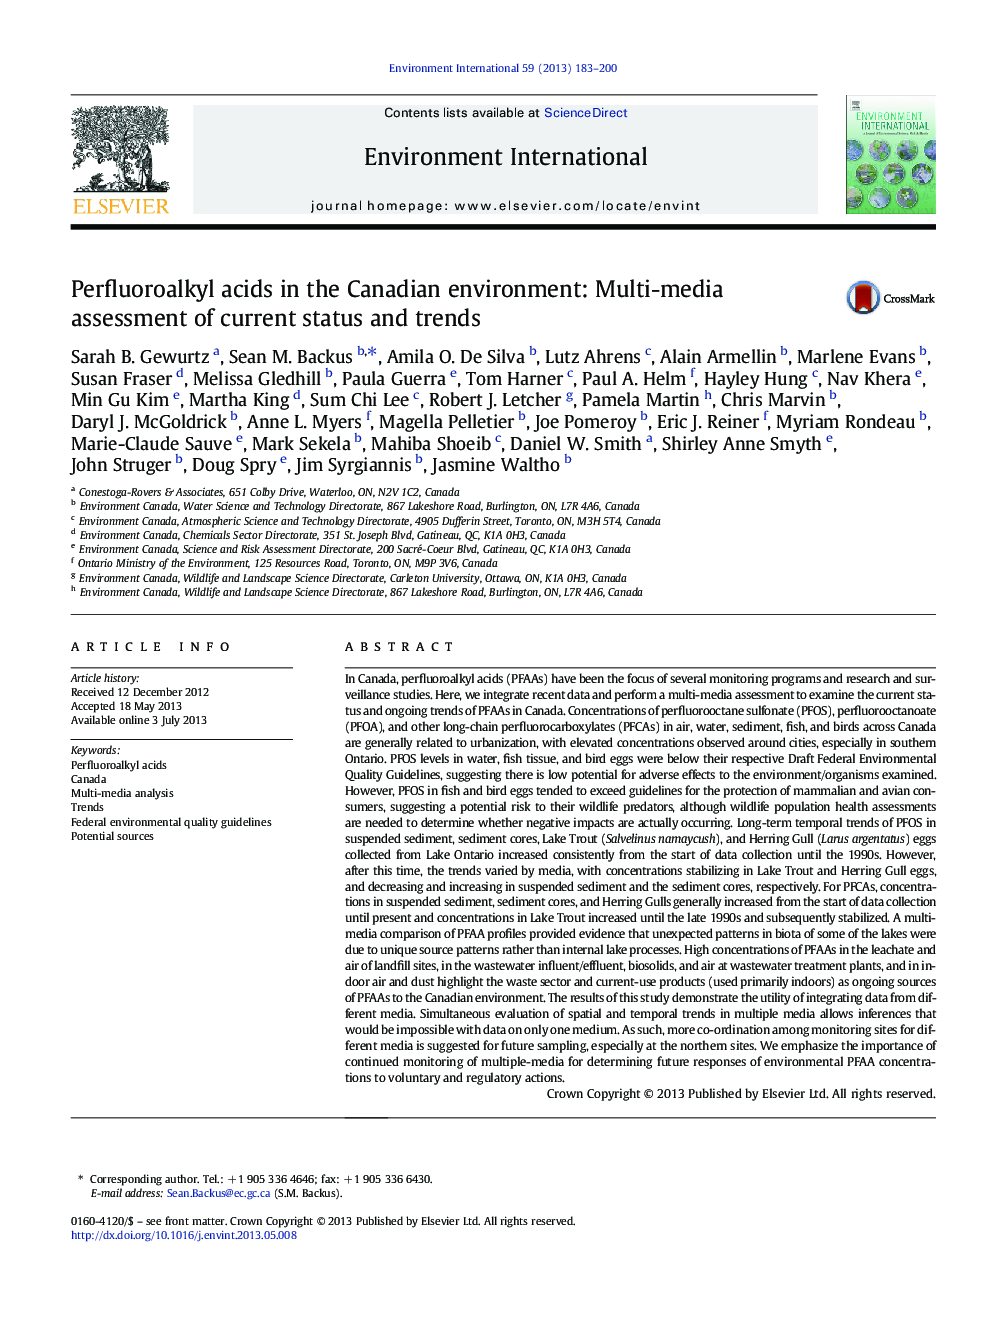 Perfluoroalkyl acids in the Canadian environment: Multi-media assessment of current status and trends